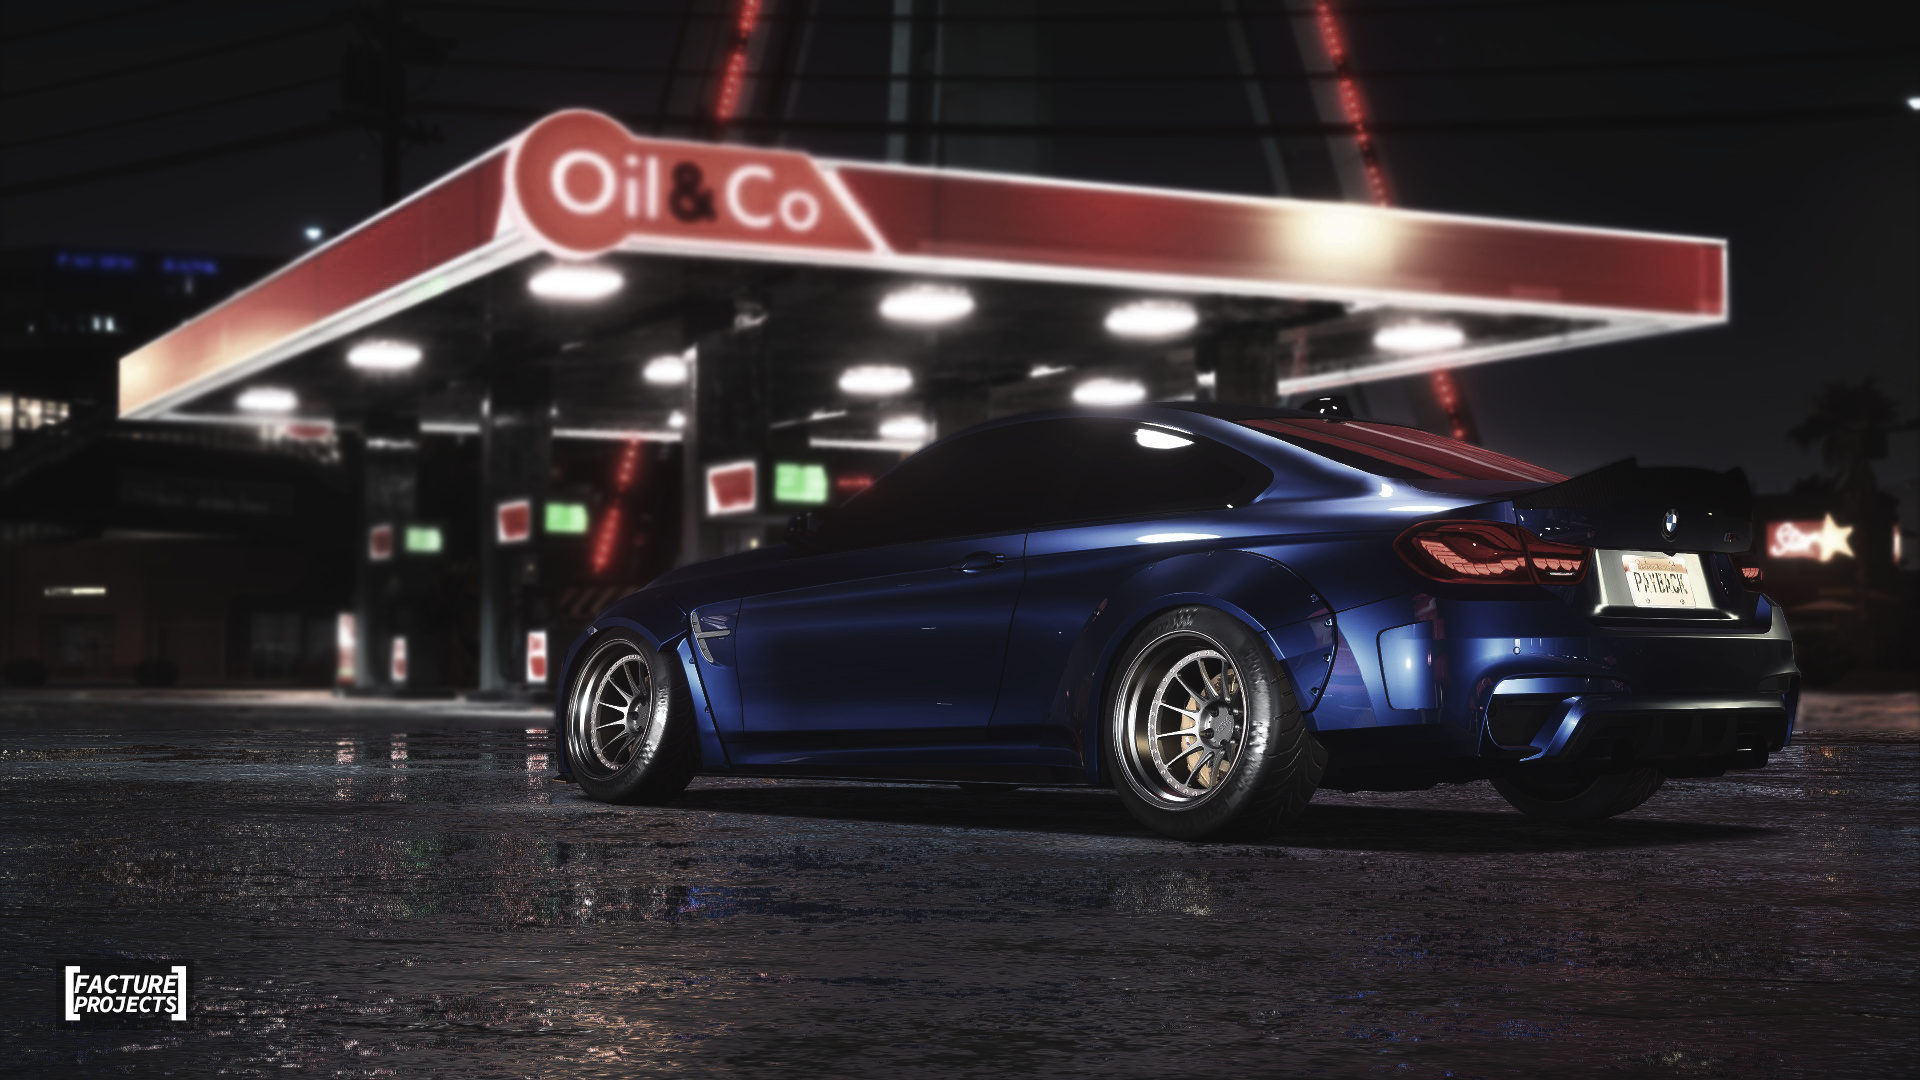 BMW BMW 4 Series Blue Cars Car Need For Speed Need For Speed Payback 1920x1080